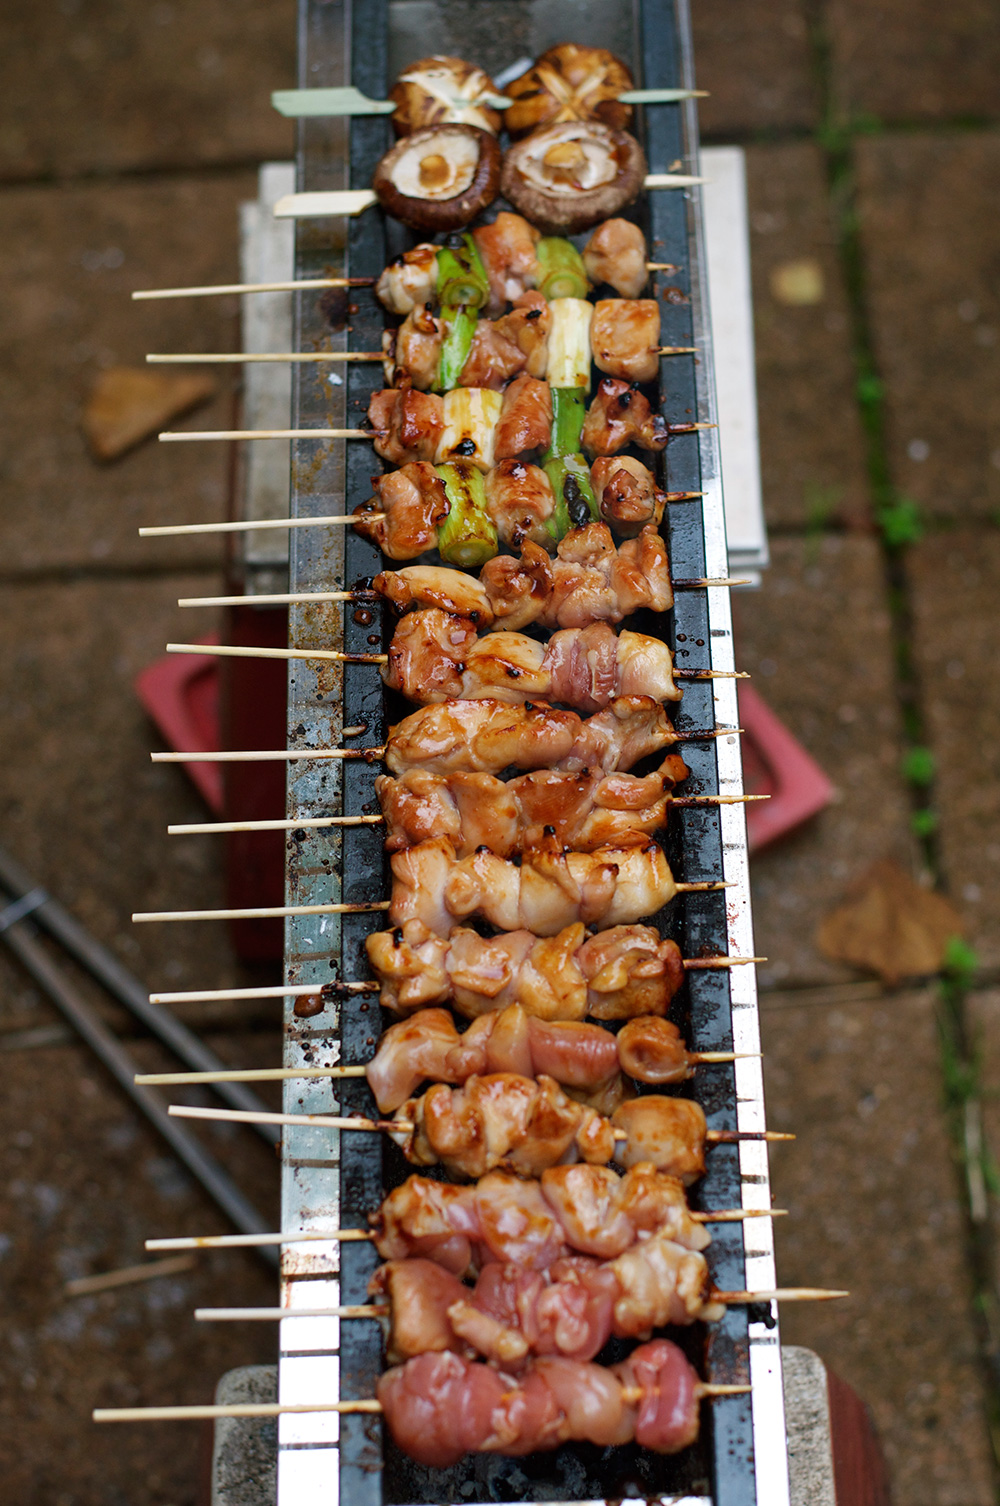 Yakitori is a Japanese skewered chicken, cooked on a griller with either sweet soy sauce or just salt. You don't marinate chicken! Great for entertaining a big crowd as it is a kind of finger food. It is so tasty and easy to eat that you would not realise you ate so many skewers of chicken!